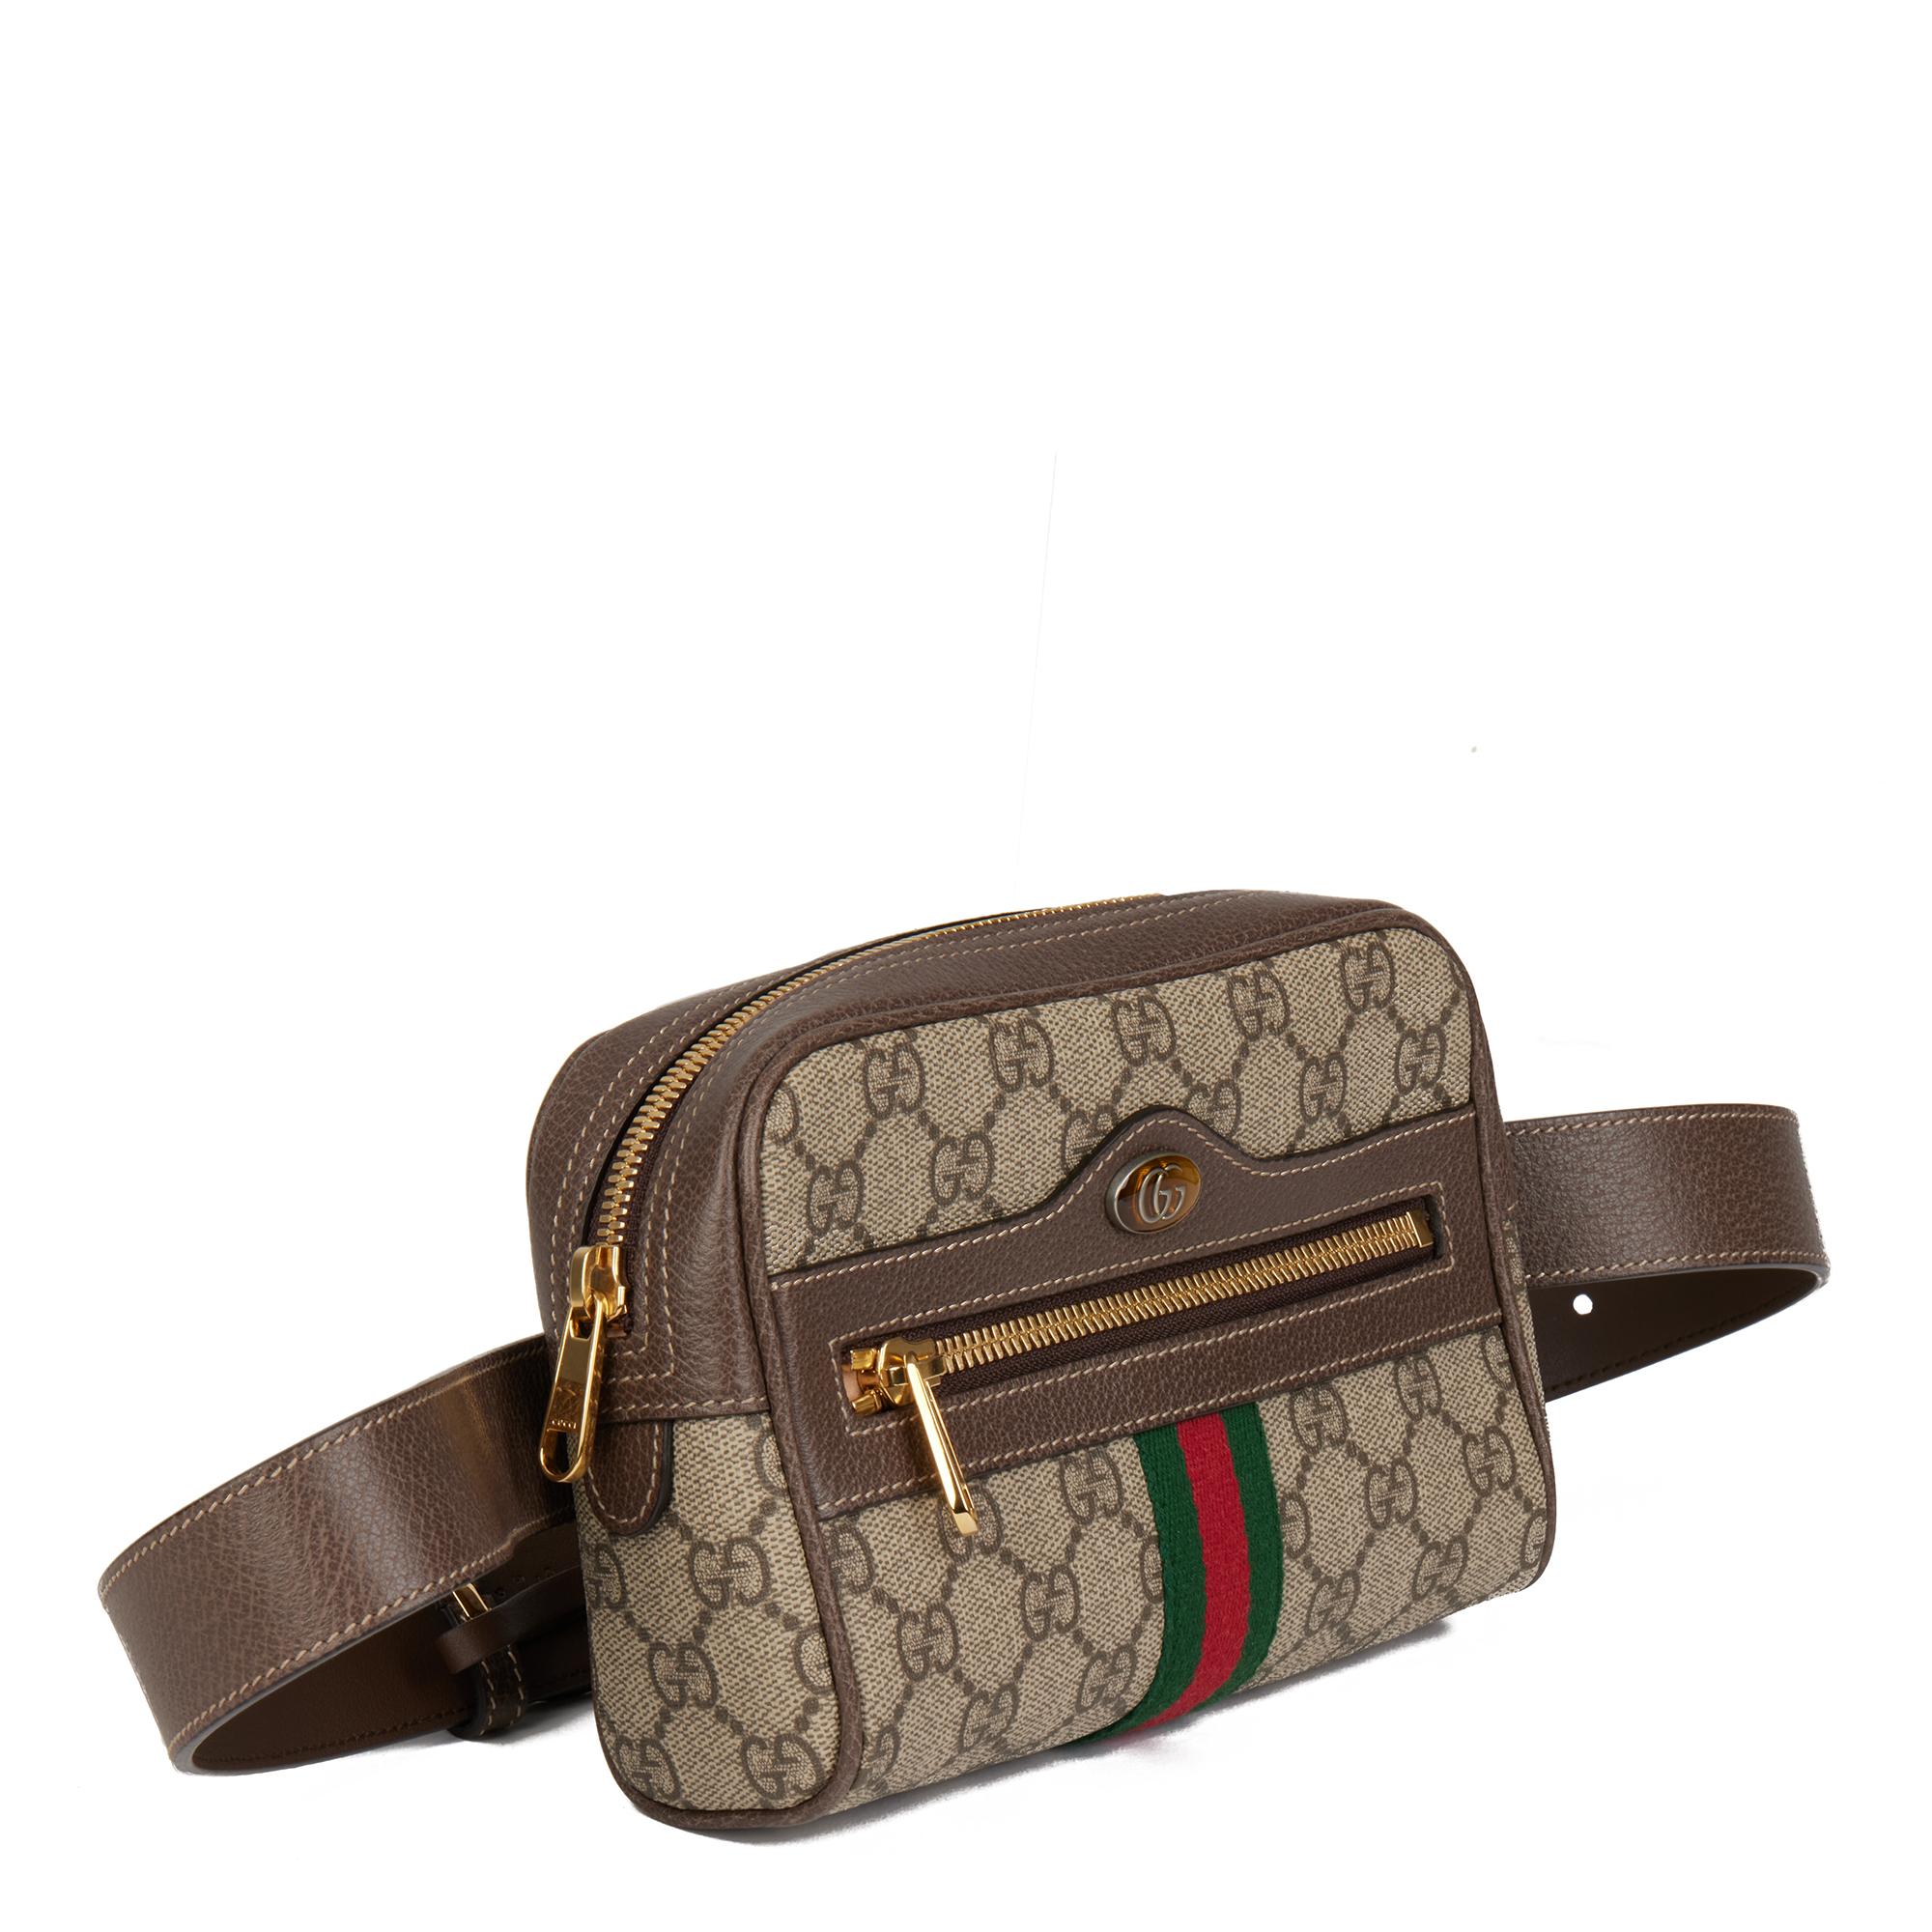 GUCCI
GG Supreme Canvas & Brown Pigskin Leather Web Small Orphidia Belt Bag

Xupes Reference: CB683
Serial Number: 517076 186628
Age (Circa): 2018
Accompanied By: Gucci Dust Bag, Box, Care Booklet
Authenticity Details: Date Stamp (Made in